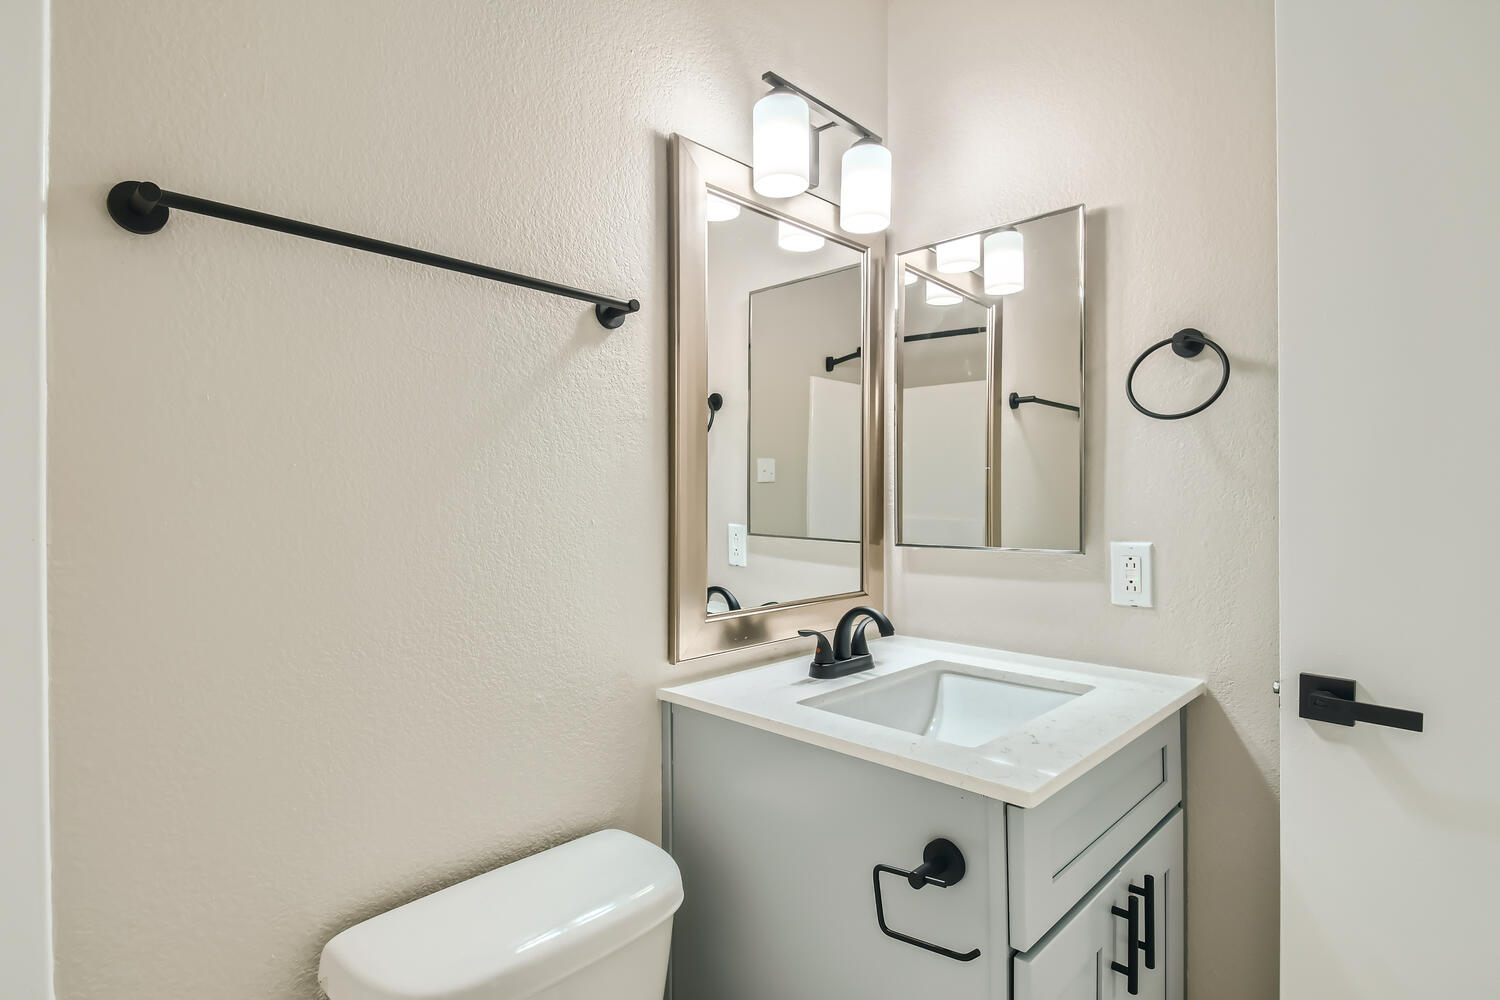 A remodeled bathroom at Rise on McClintock with a quartz countertop on the vanity and towel rods.